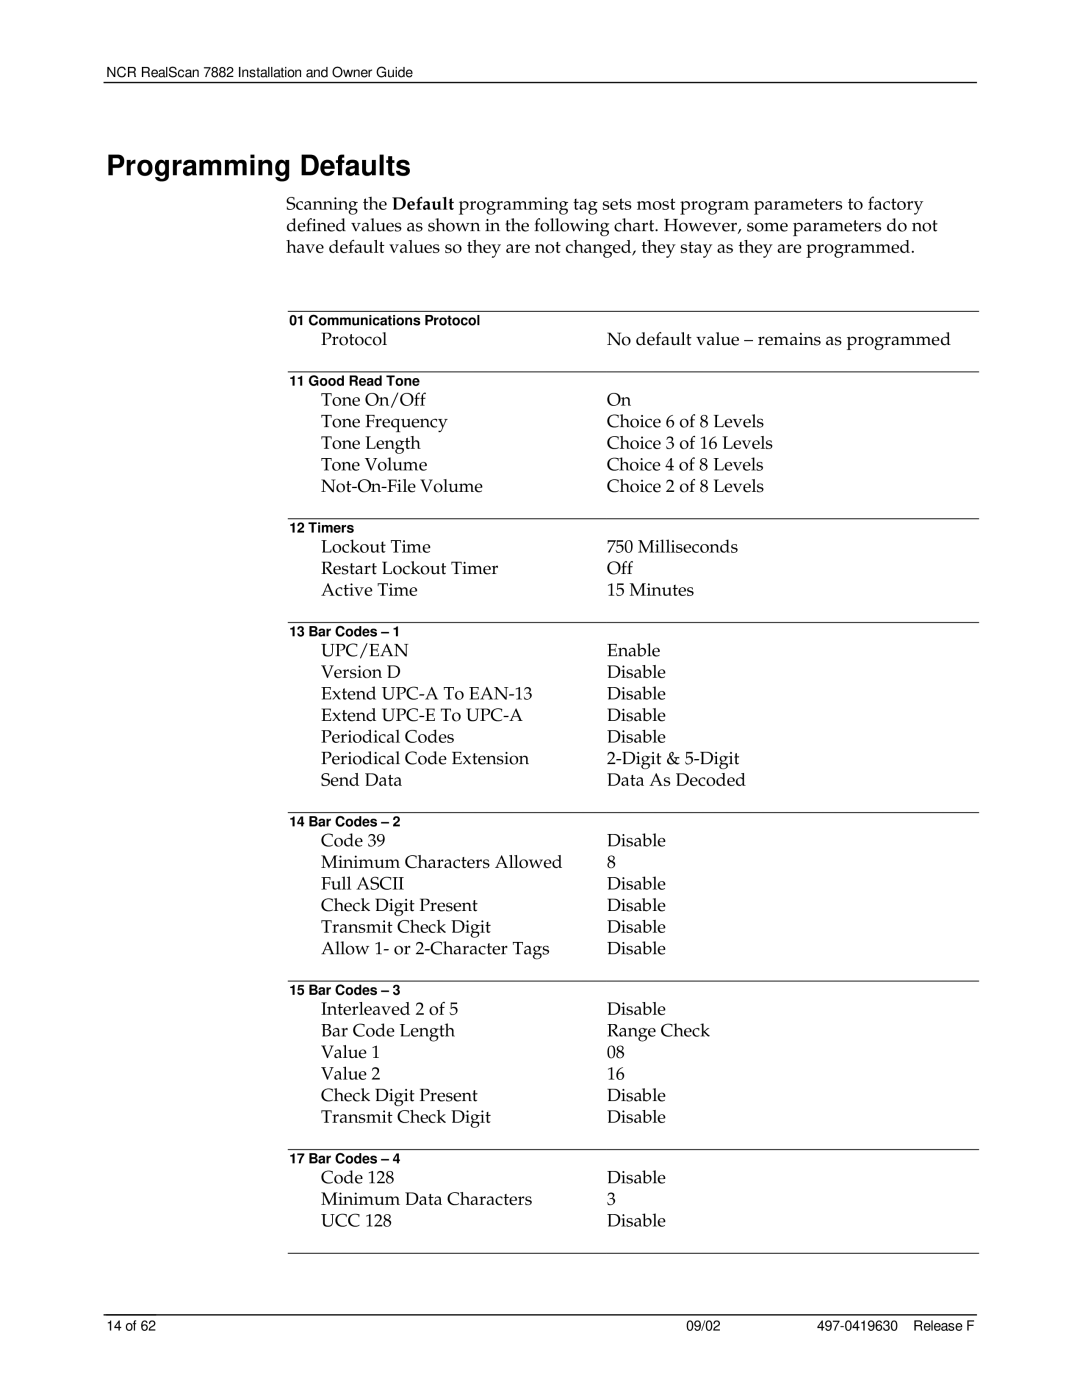 NCR 7882 manual Programming Defaults, Communications Protocol, Good Read Tone, Timers, Bar Codes 